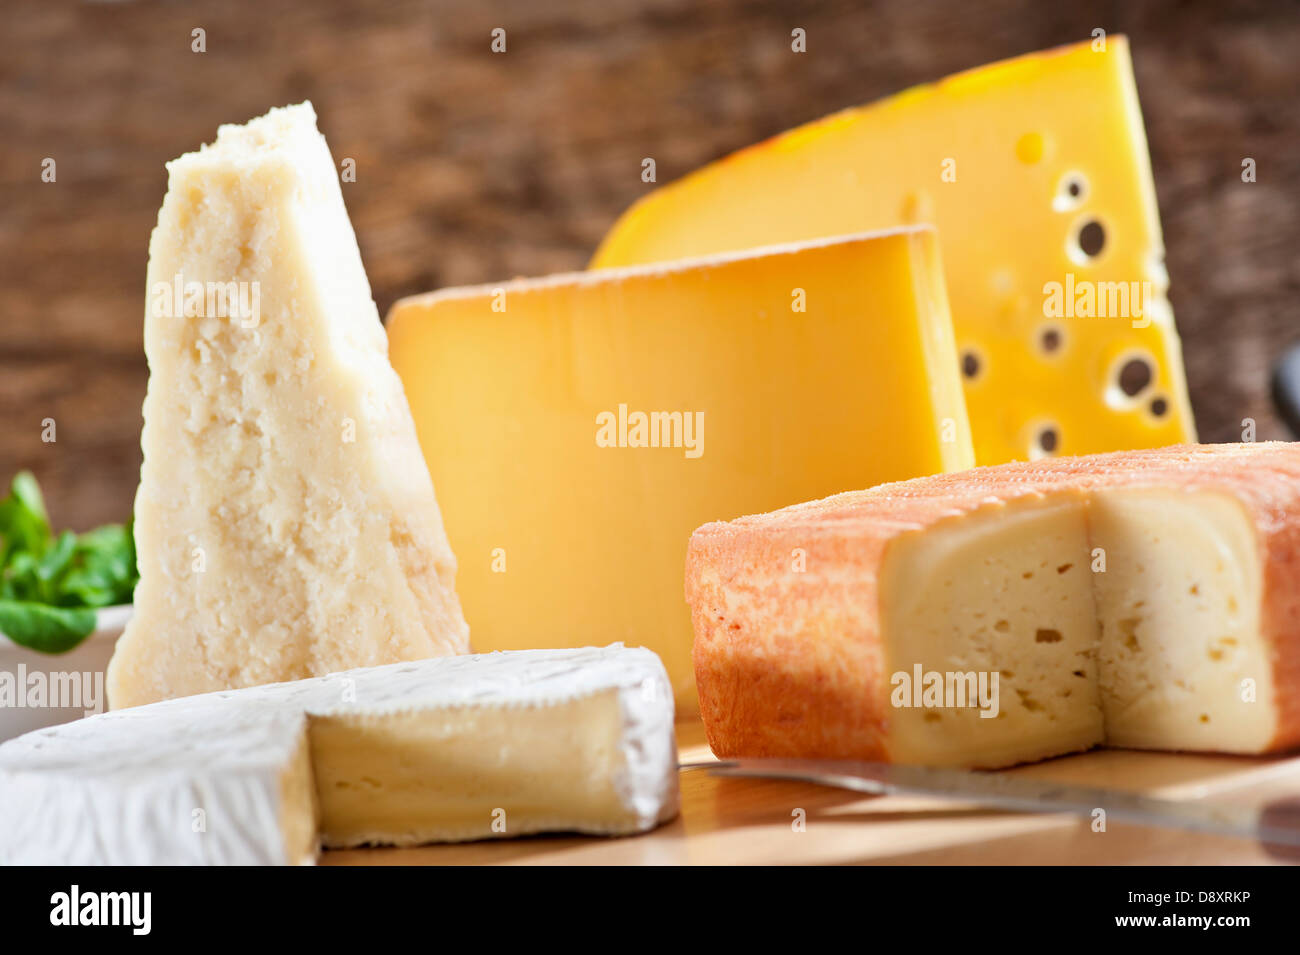 Selection of cheeses Stock Photo